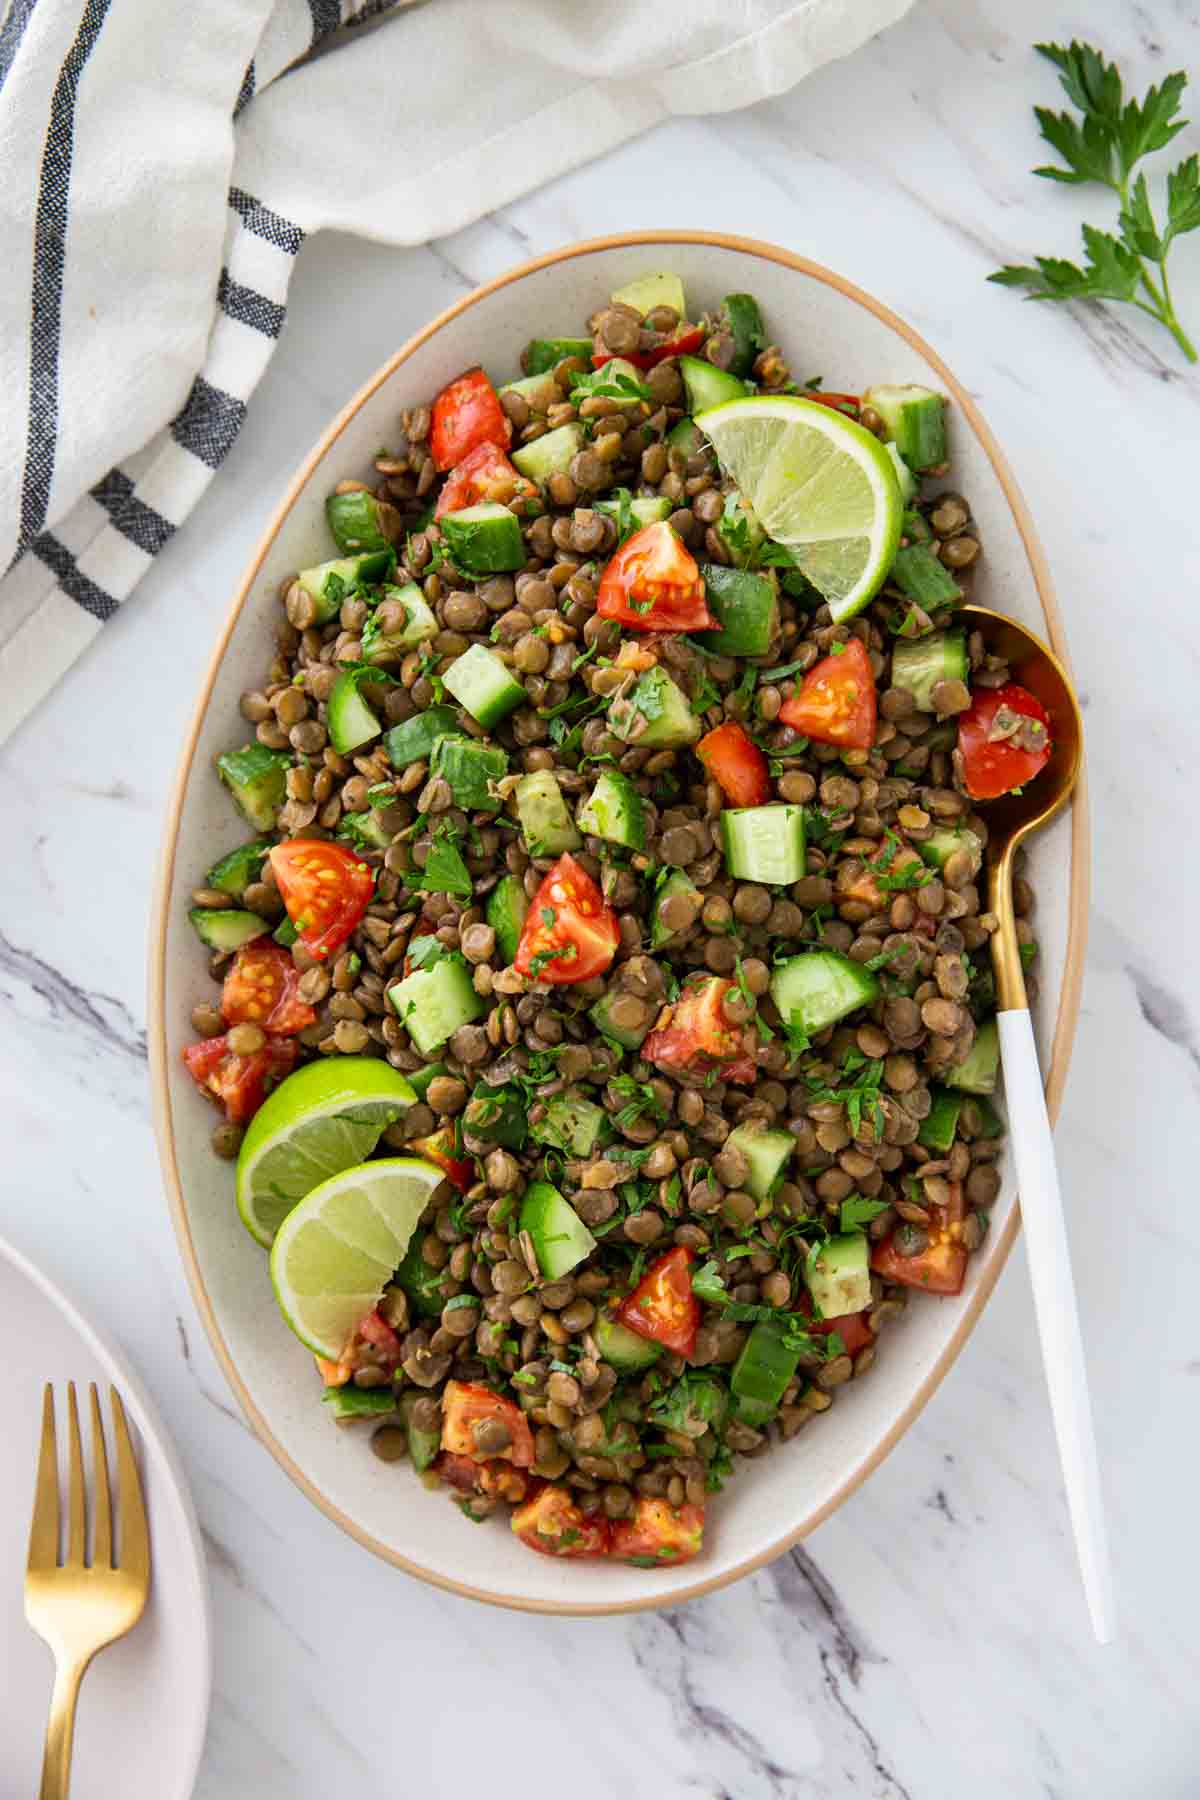 Prepared whole lentil salad in a serving dish with a serving spoon.